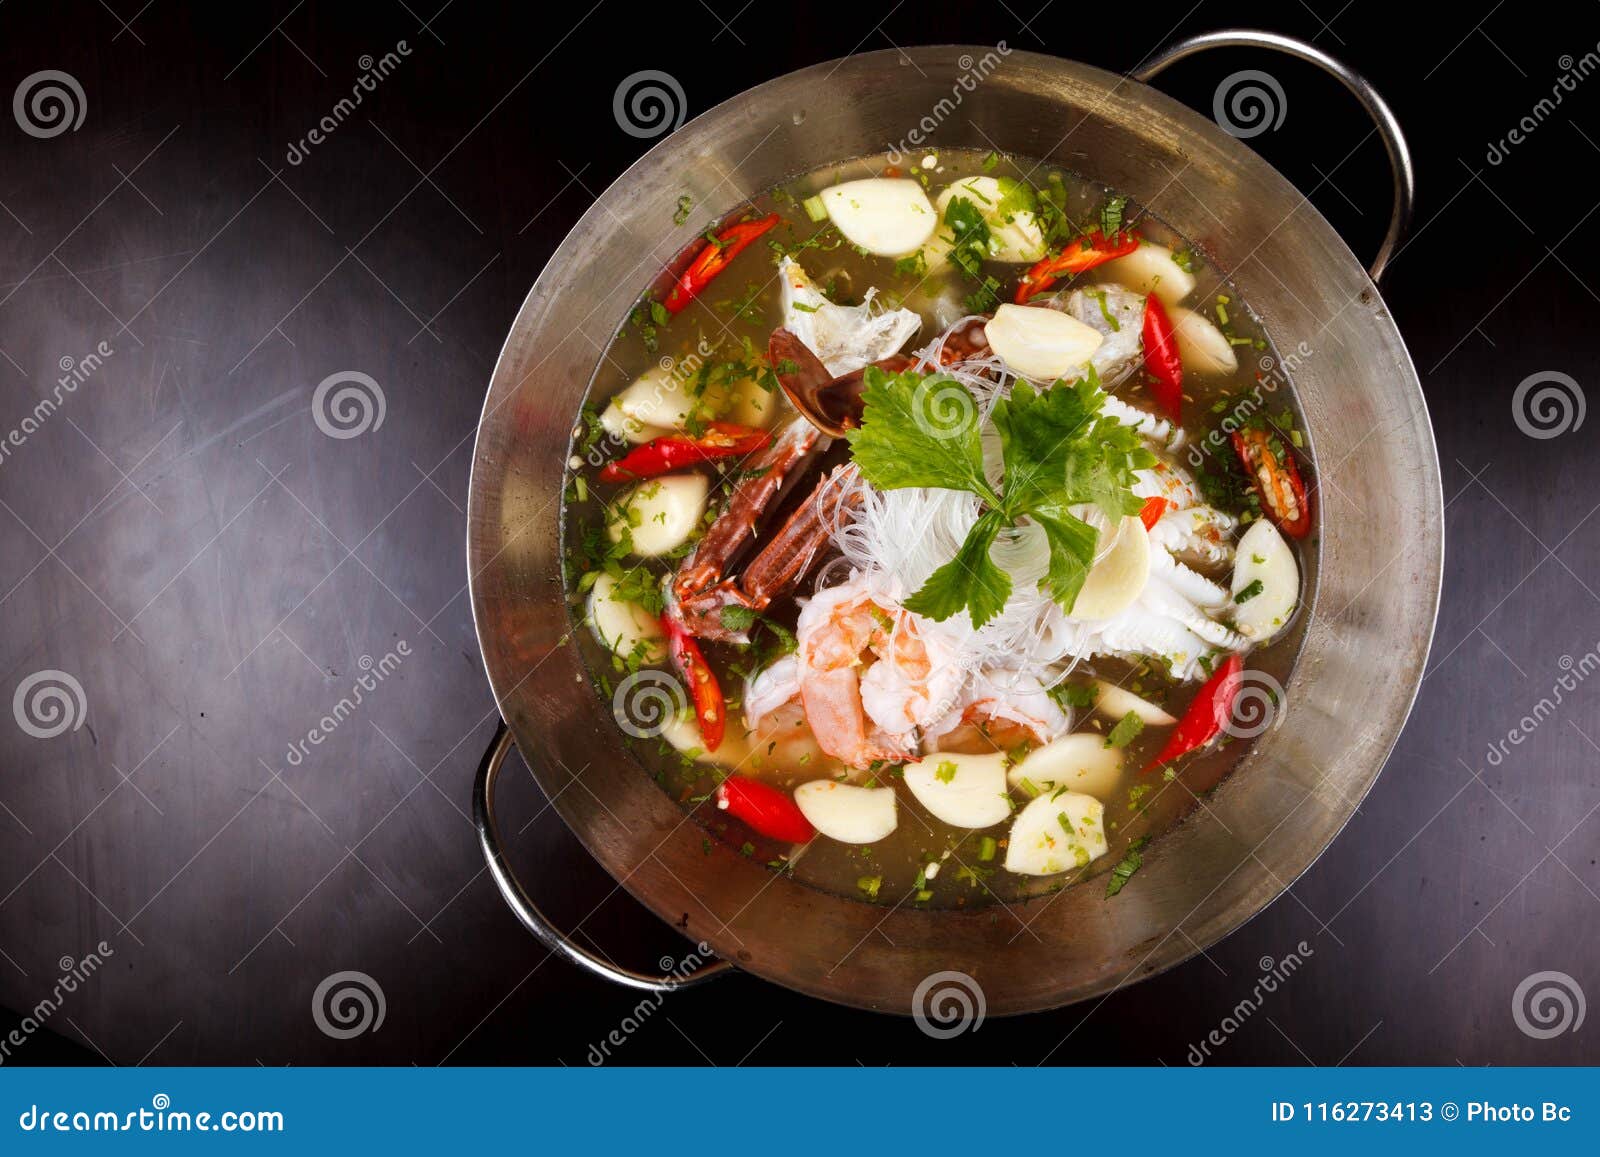 Tomyum seafood stock image. Image of grilled, background - 116273413